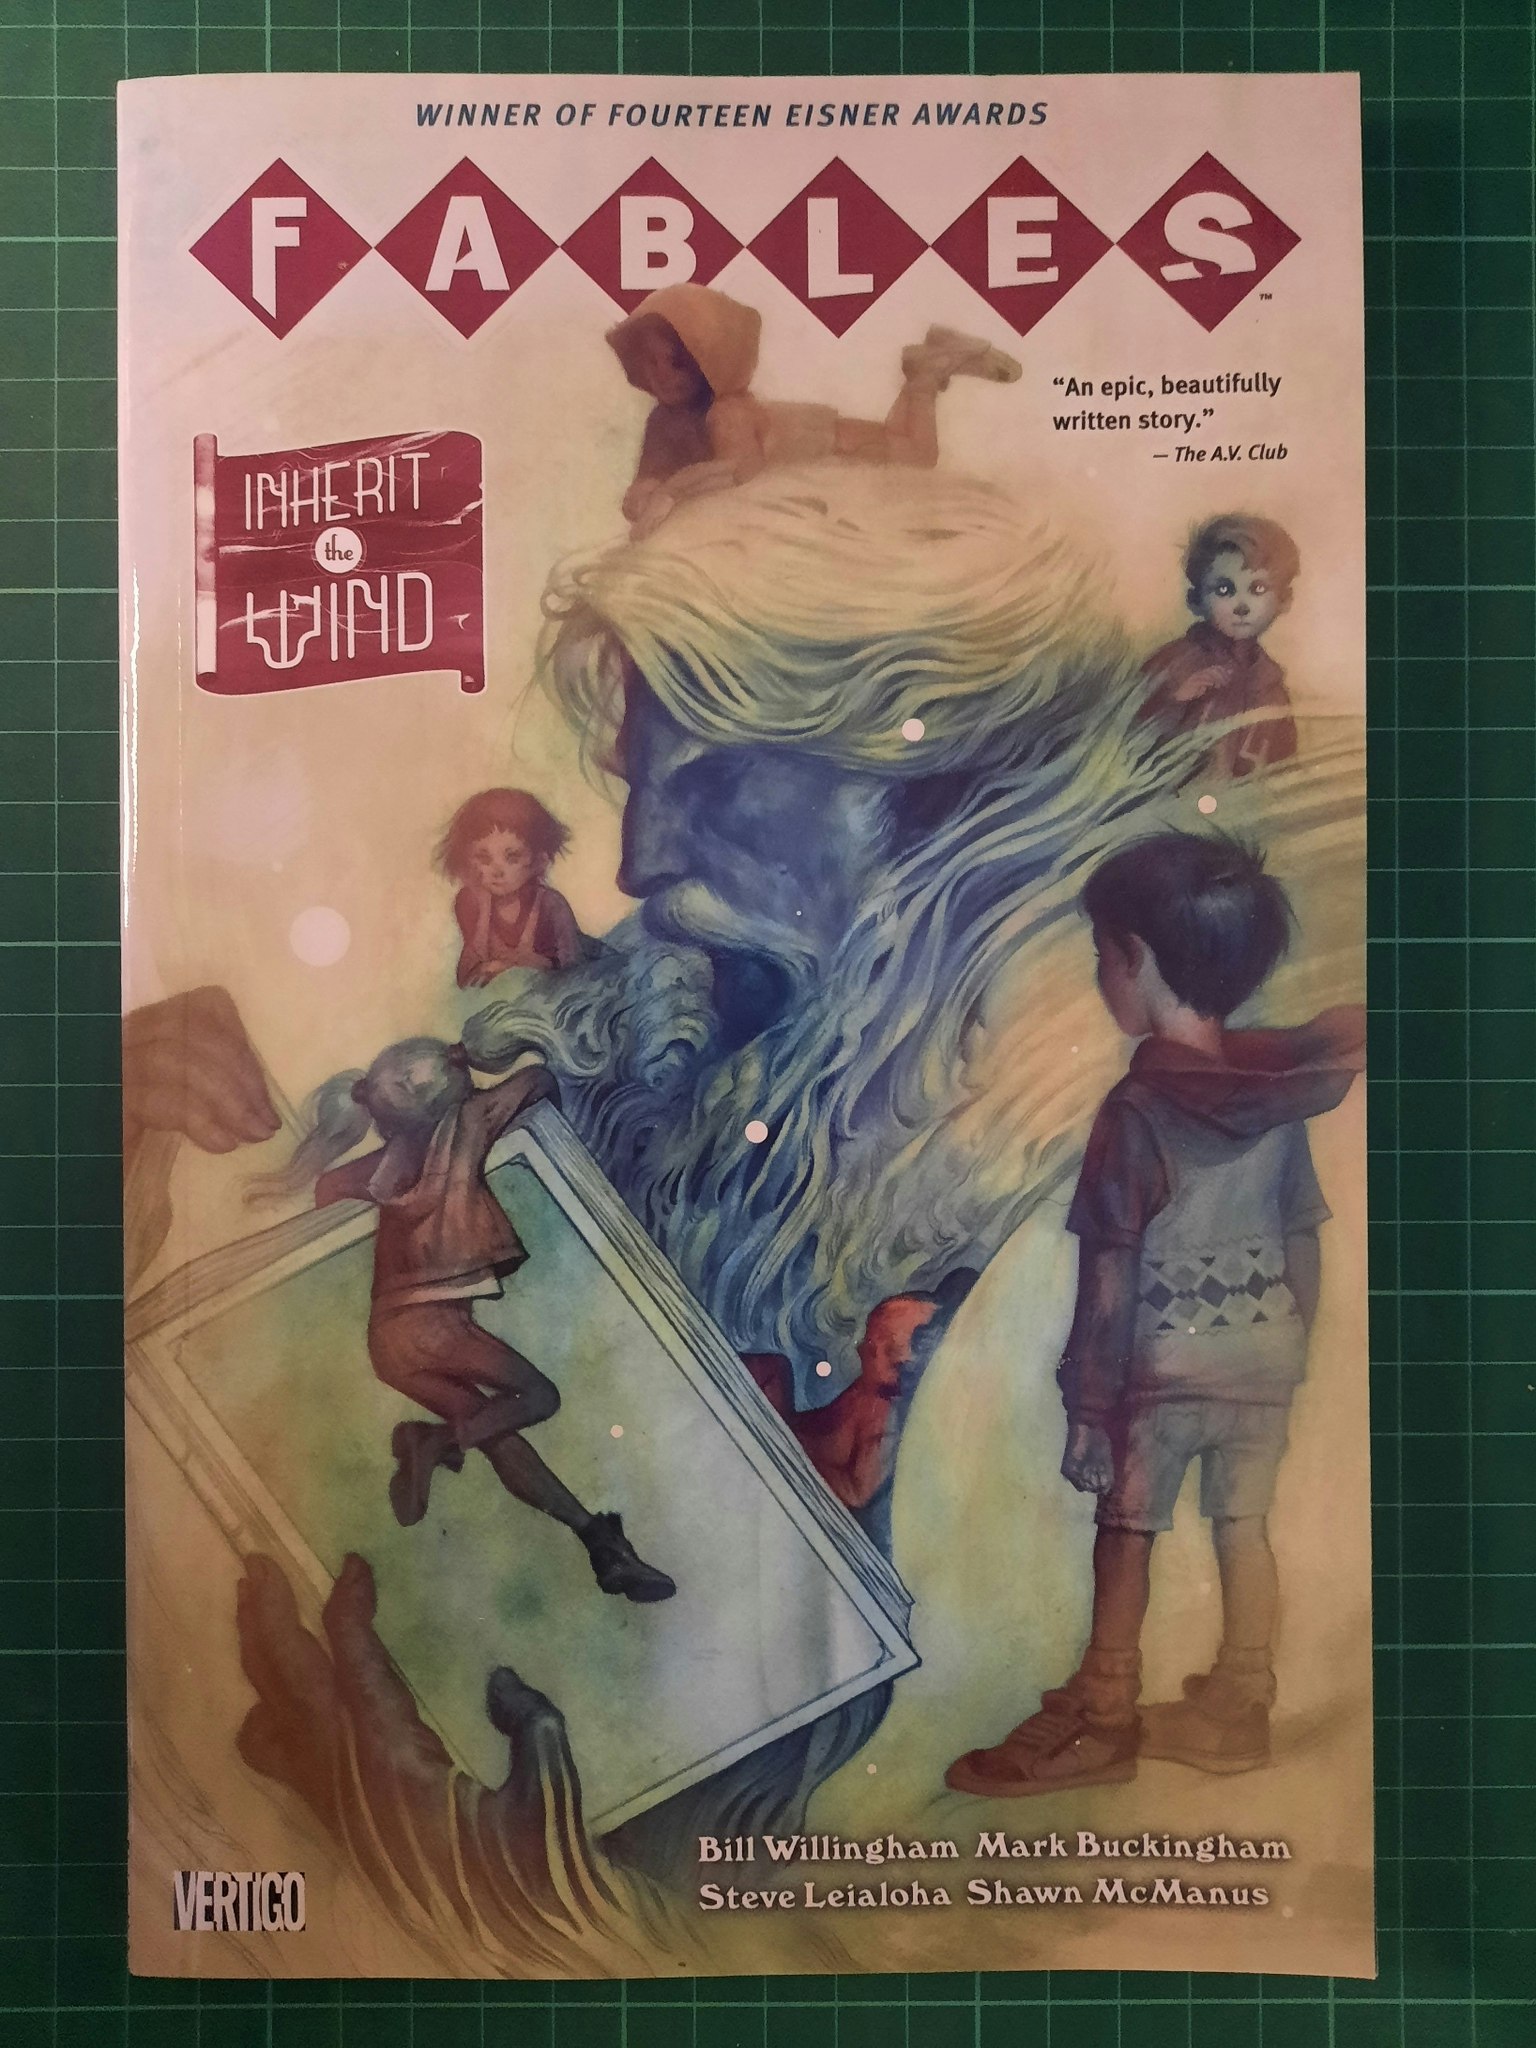 Fables : Inherit the wind